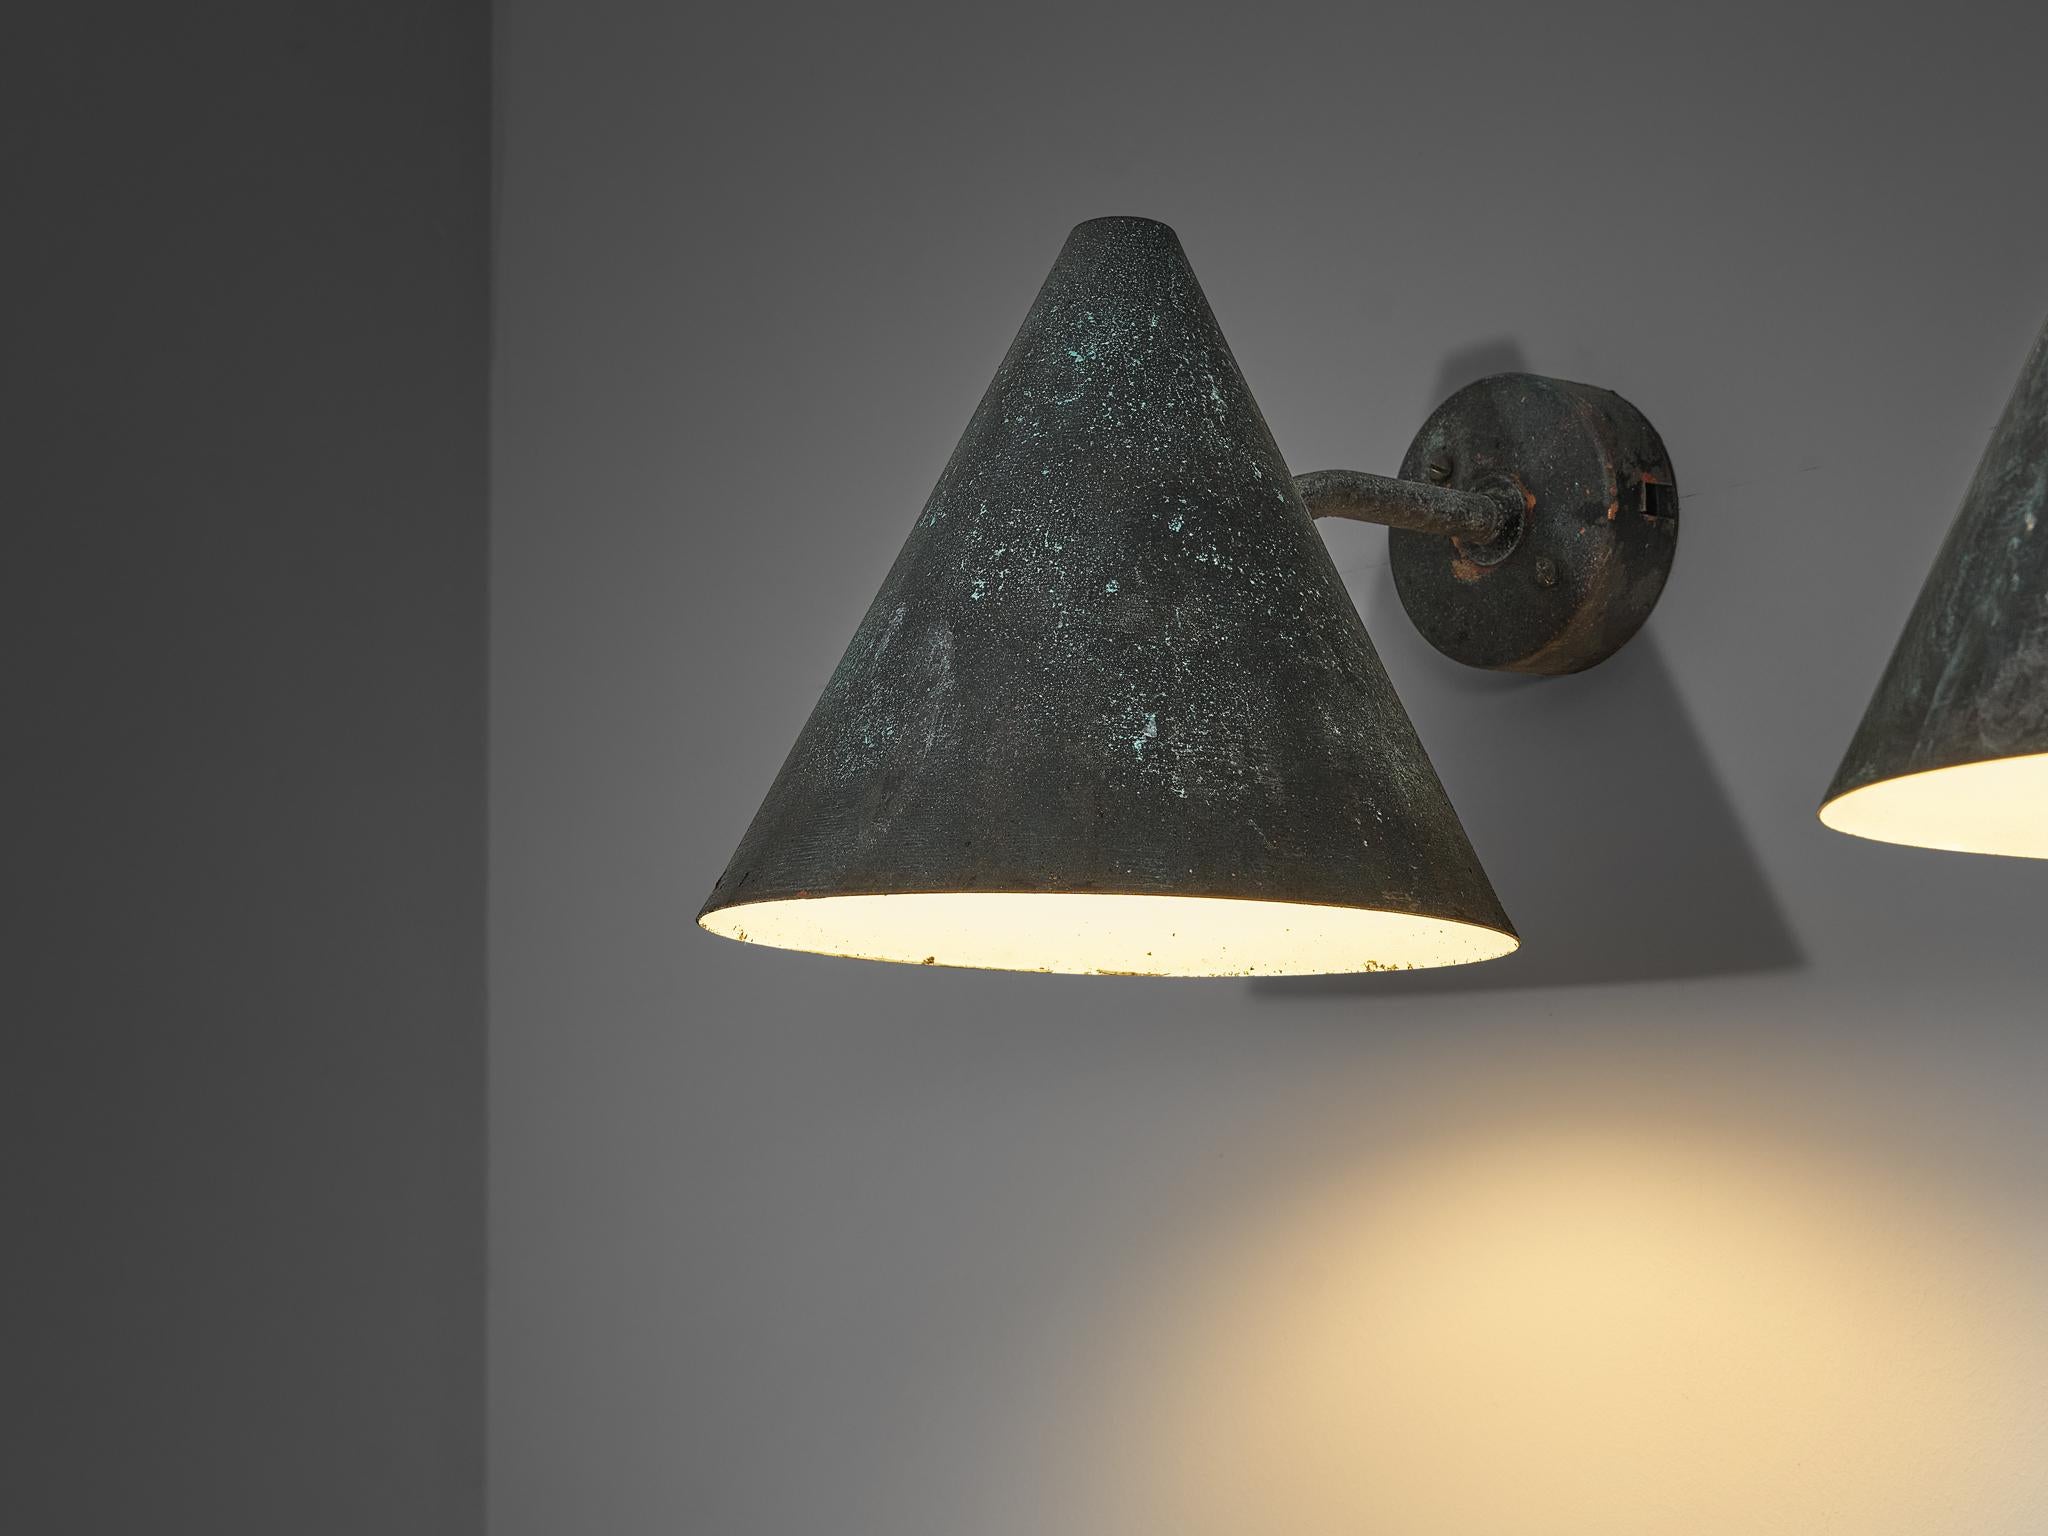  Hans-Agne Jakobsson 'Tratten' Wall Lights in Patinated Copper  For Sale 6